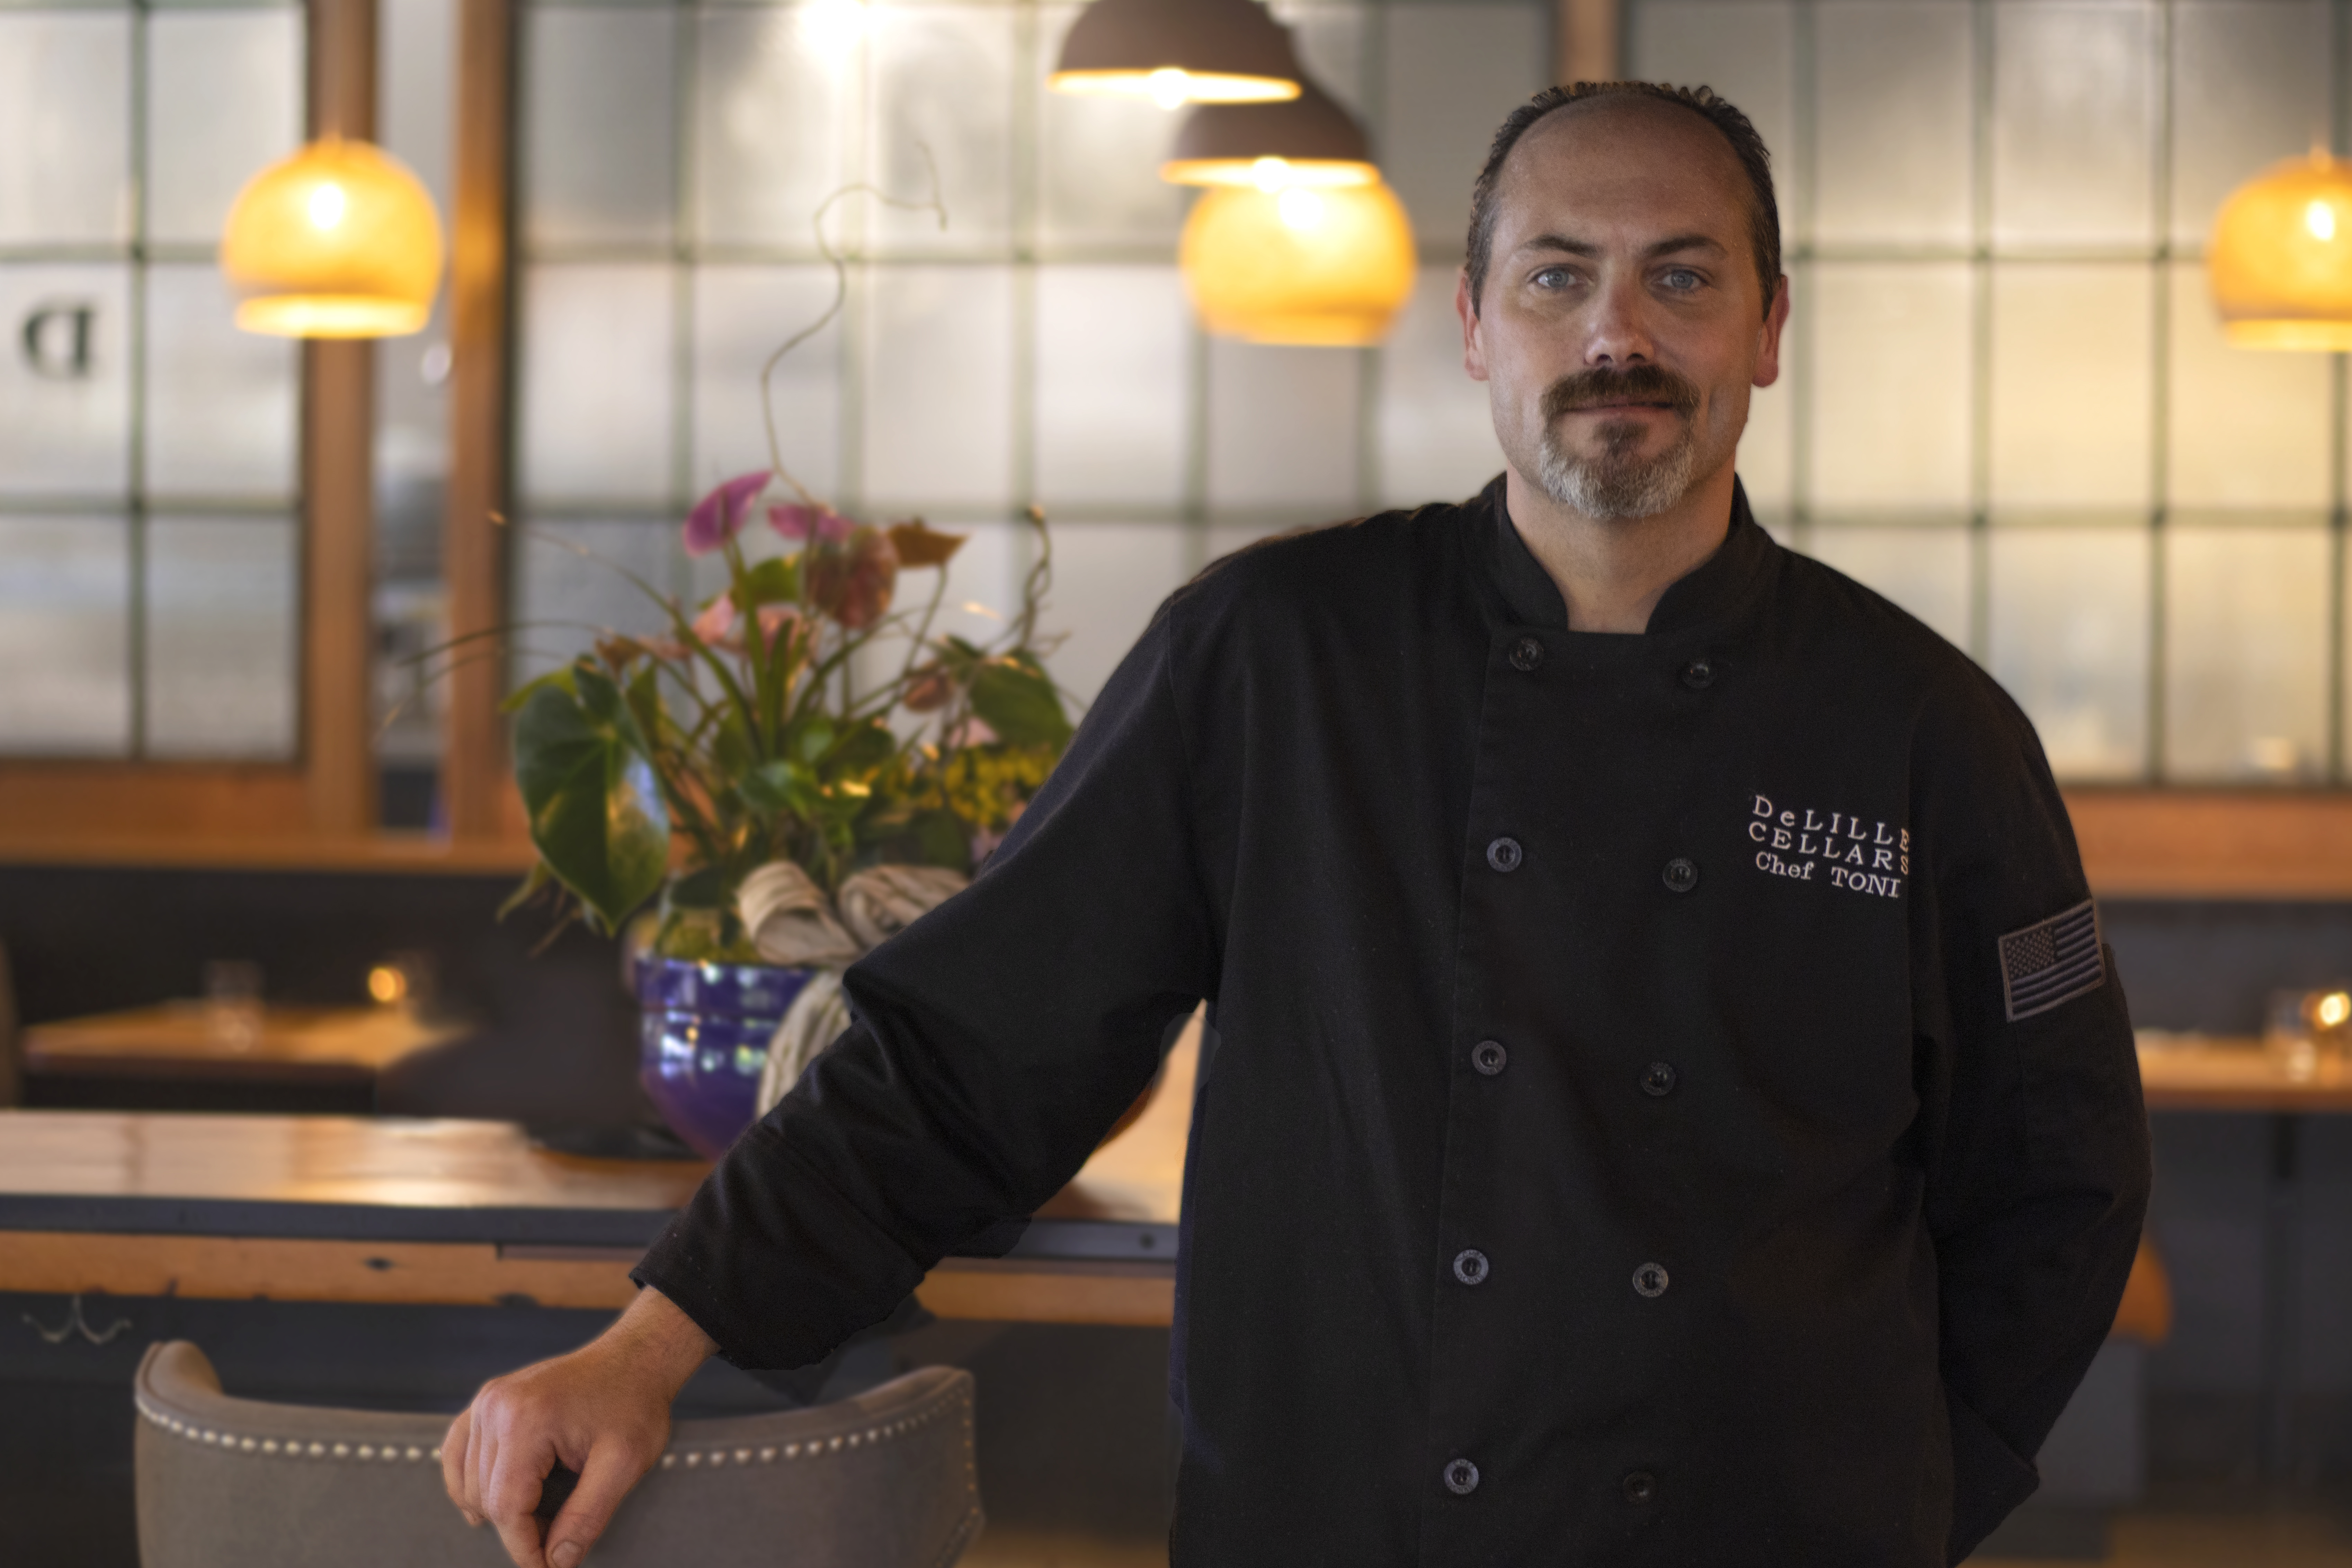 Chef Michael C. Toni at The Lounge Restaurant in Woodinville Washington